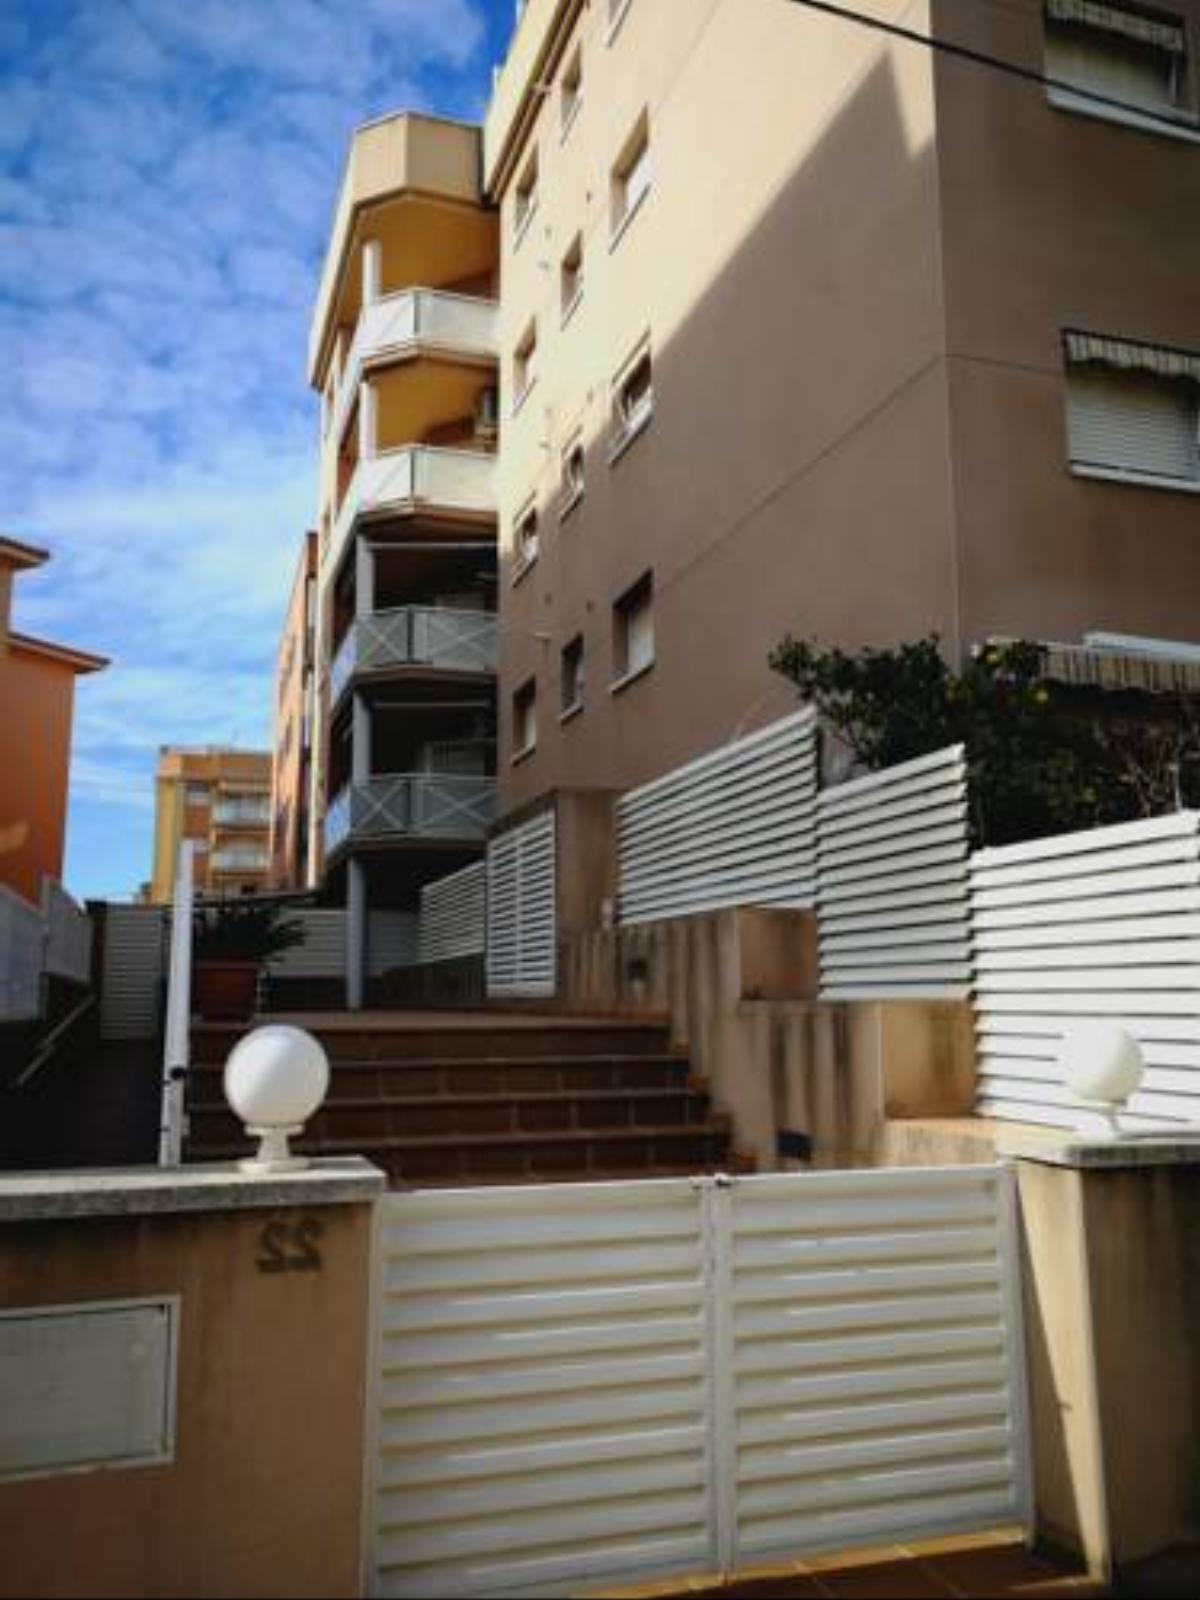 Apartment with huge solarium, 3 minutes to beach Hotel Calafell Spain